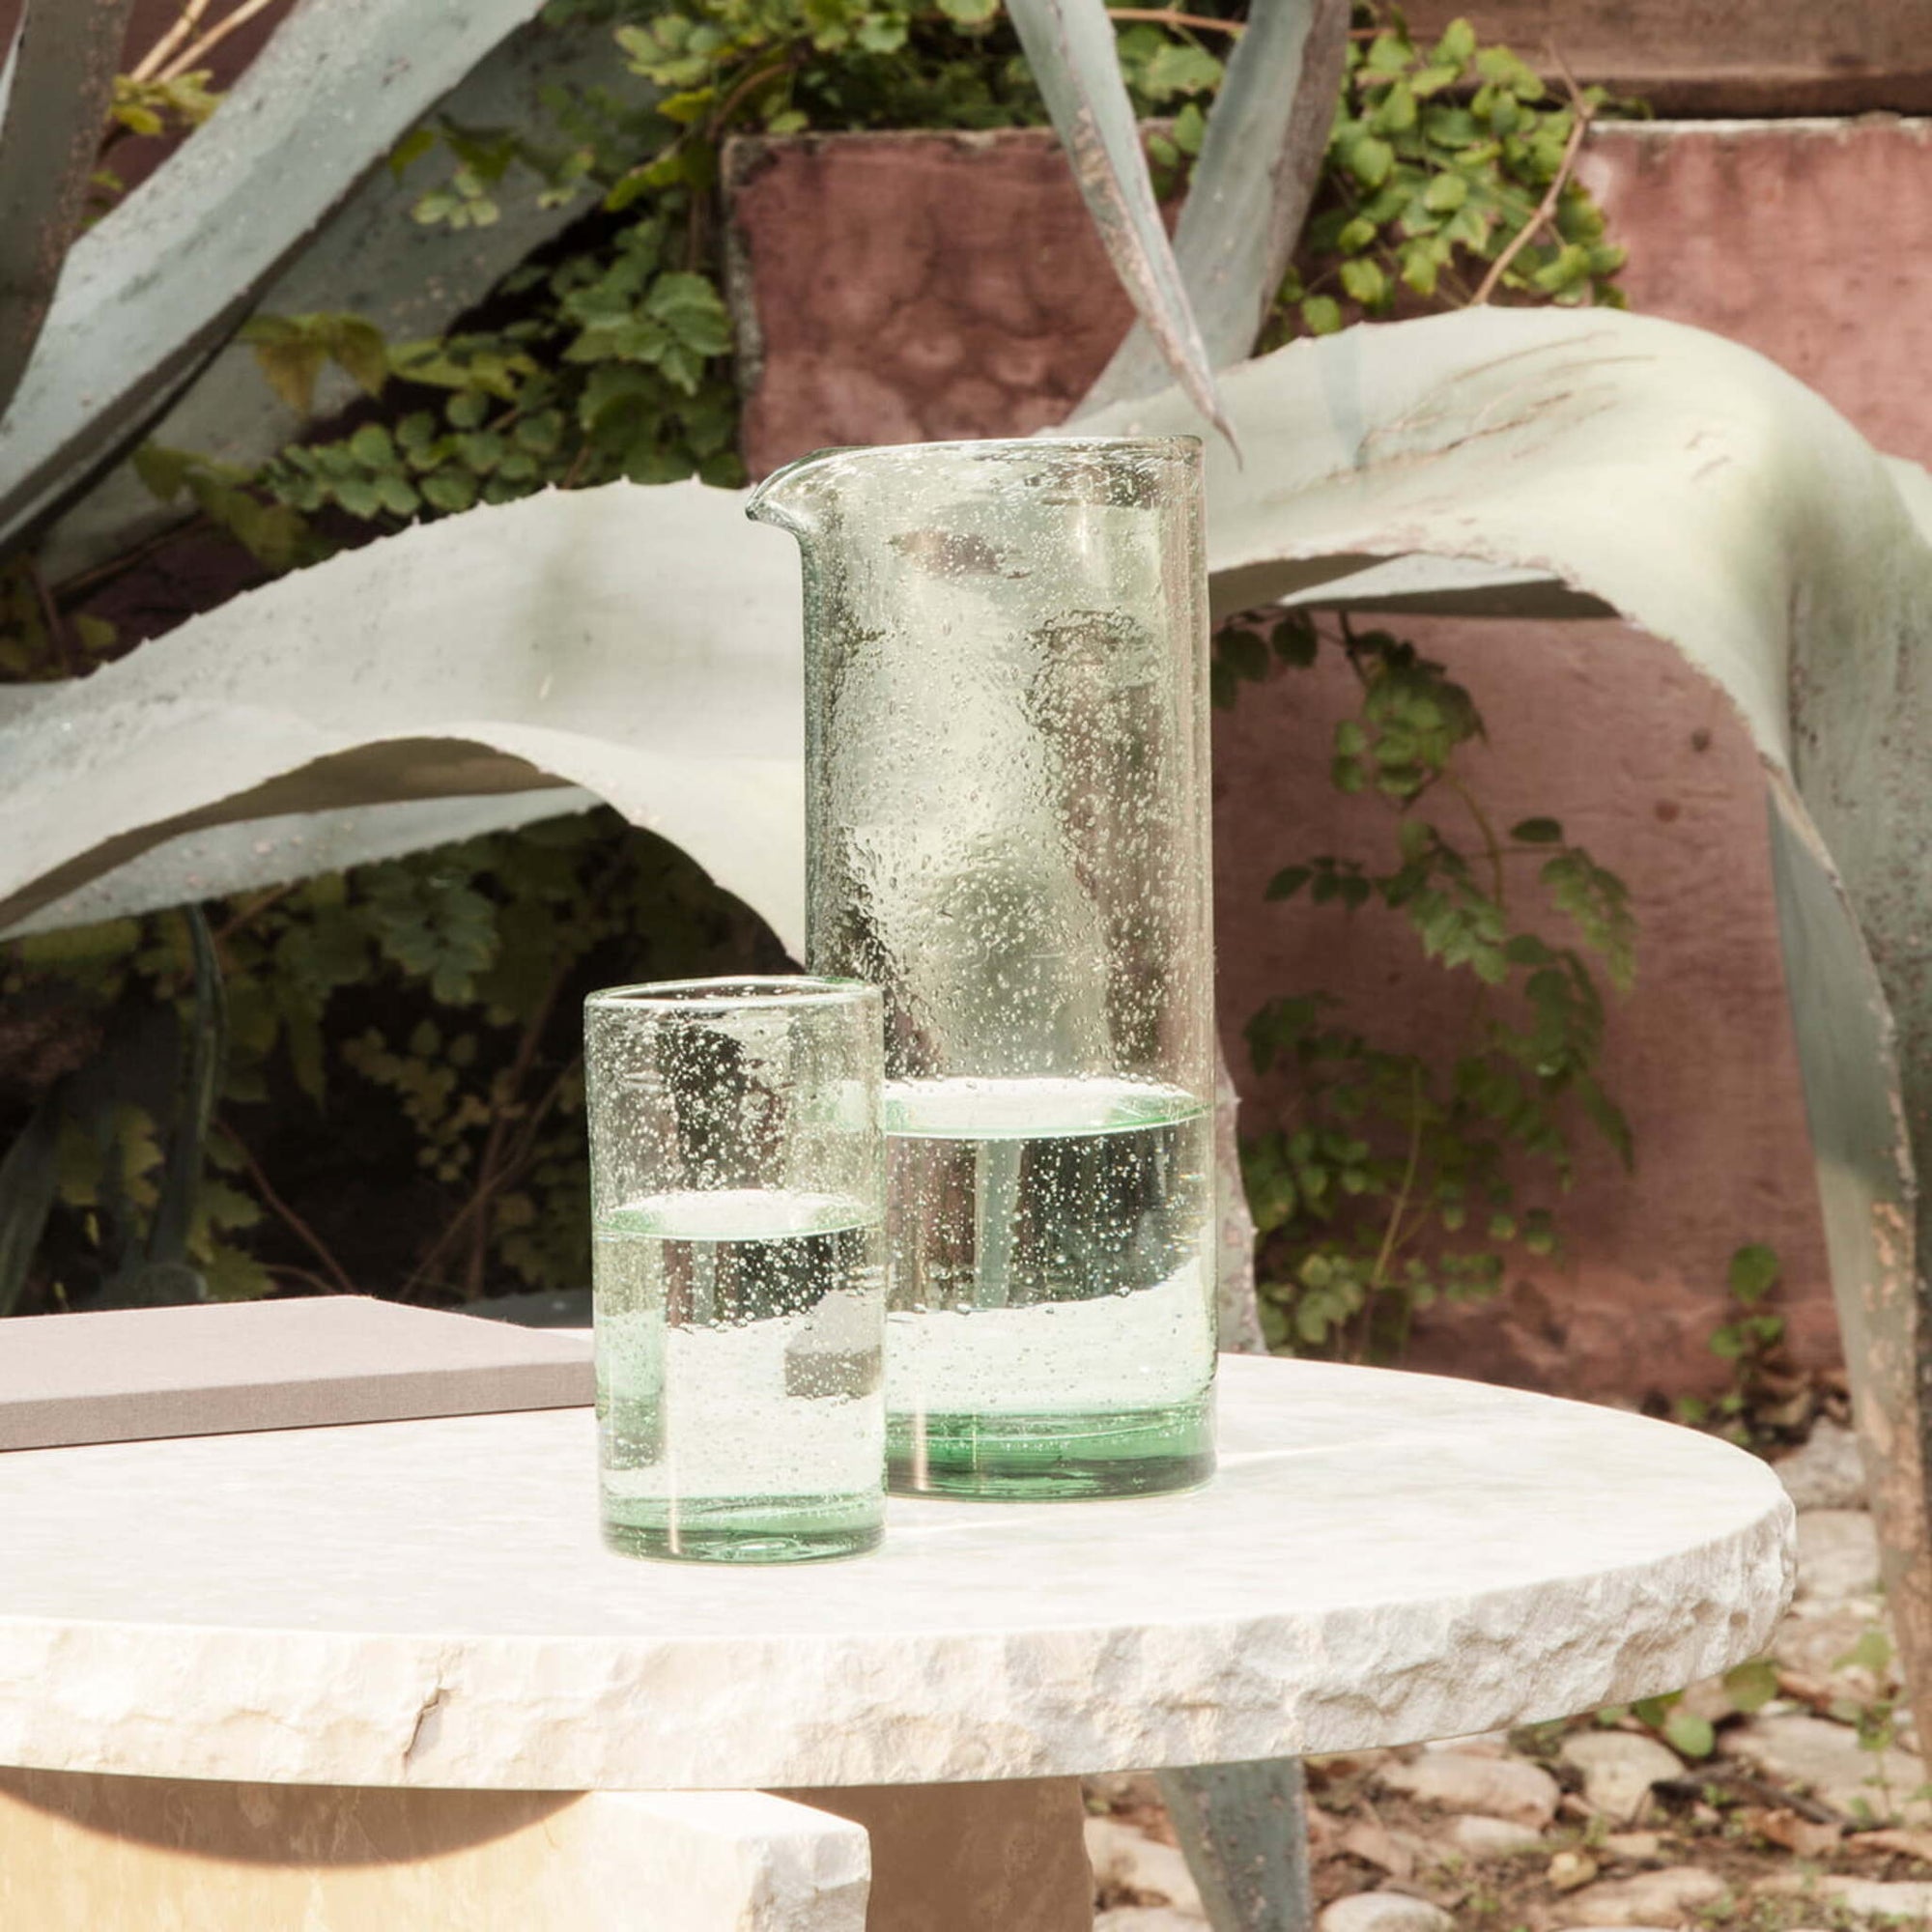 ferm LIVING Oli Water Glass - Tall - Recycled